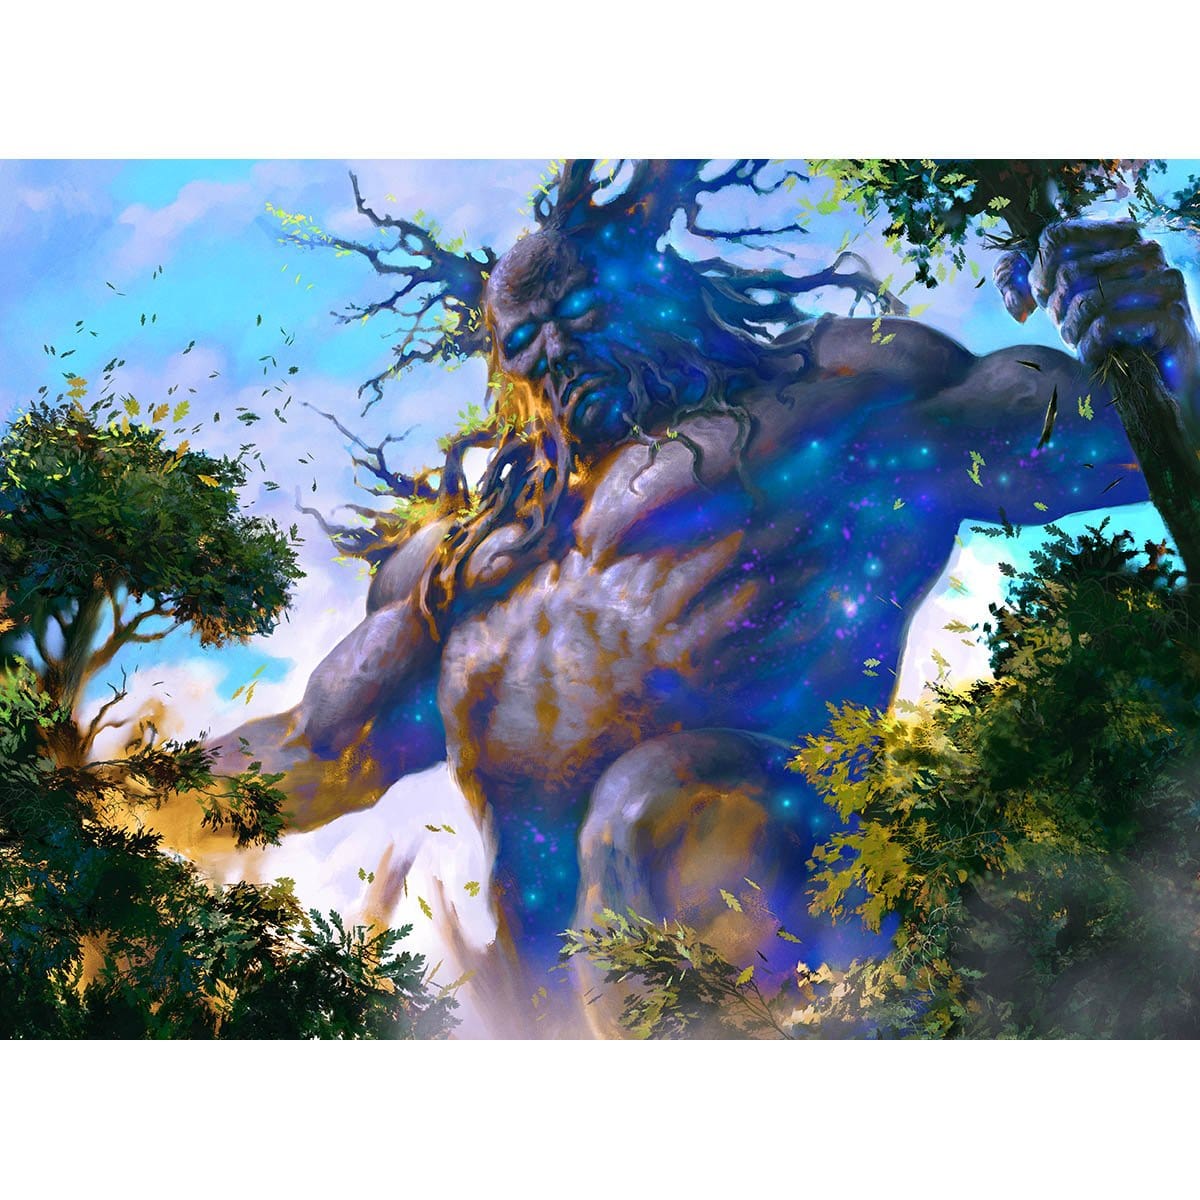 Nyxborn Colossus Print - Print - Original Magic Art - Accessories for Magic the Gathering and other card games